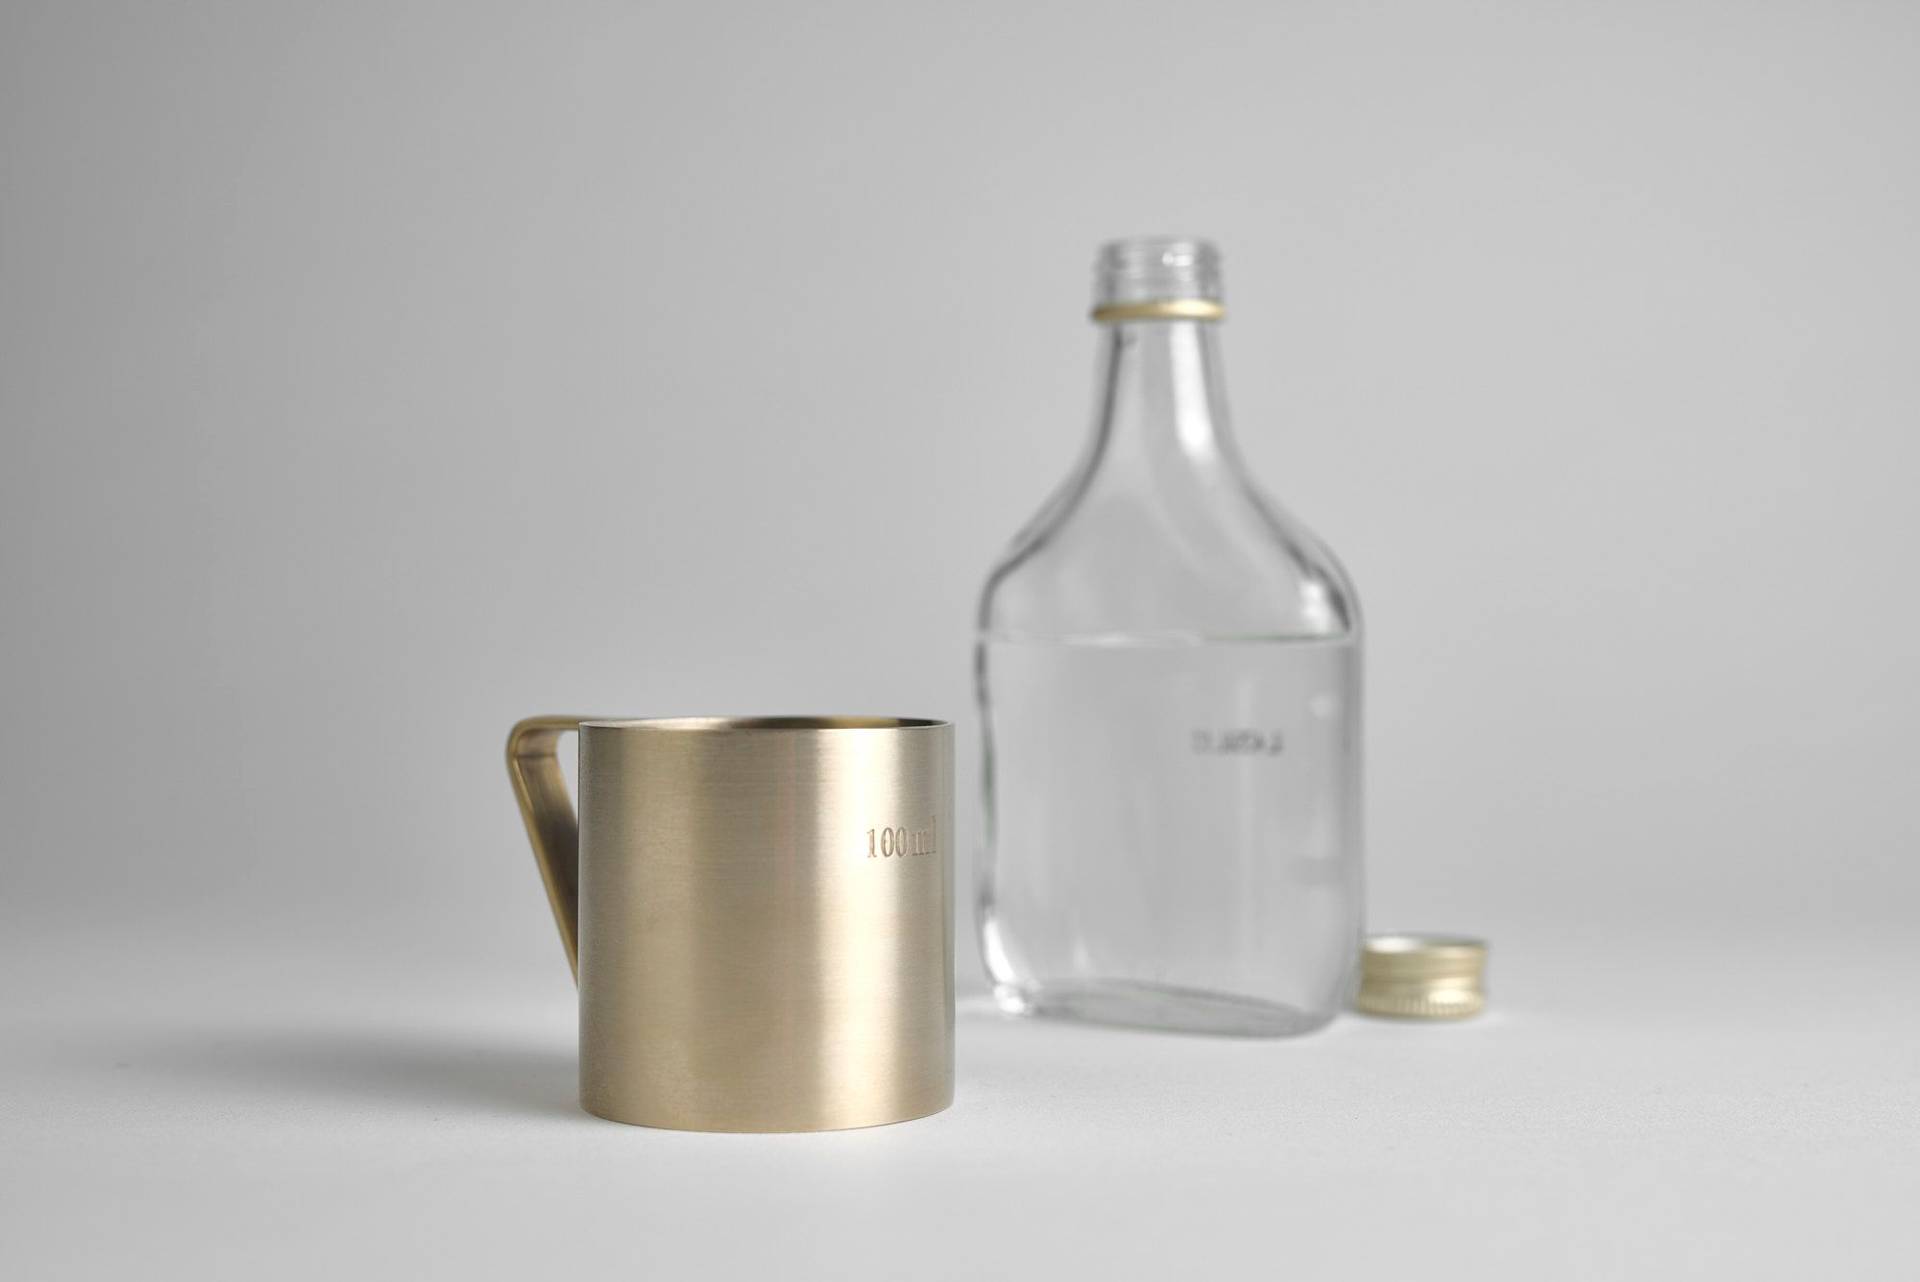 brass measuring cup by danish ferm living on white background